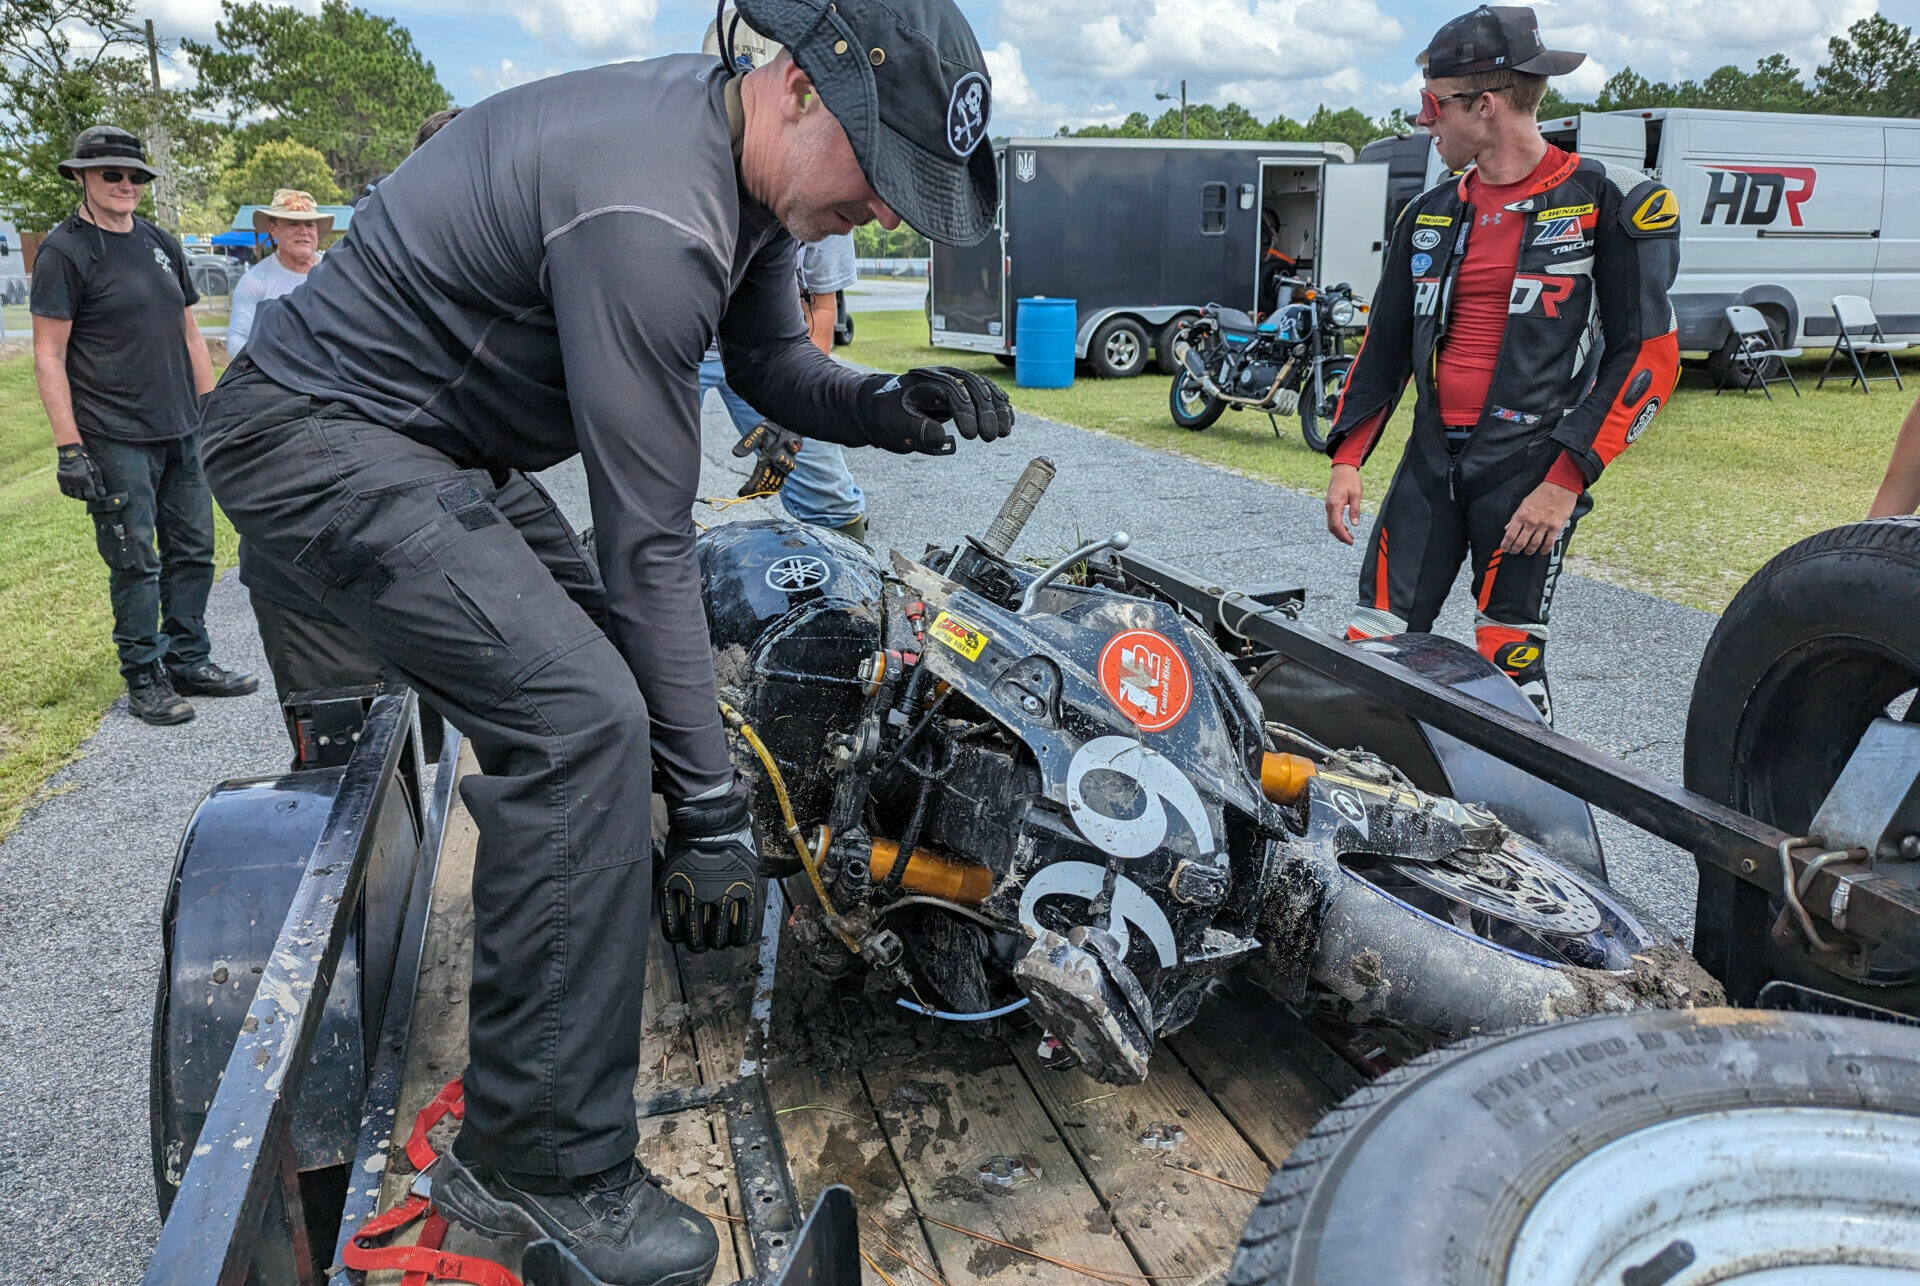 Army of Darkness Captain Sam Fleming pulls his crashed Yamaha YZF-R1 off the crash truck's trailer the day before the N2/WERA National Endurance four-hour race at Roebling Road Raceway. Team rider Hunter Dunhaam (right) and Crew Chief Tim Gooding (far left) stand by to help. Photo courtesy Army of Darkness.